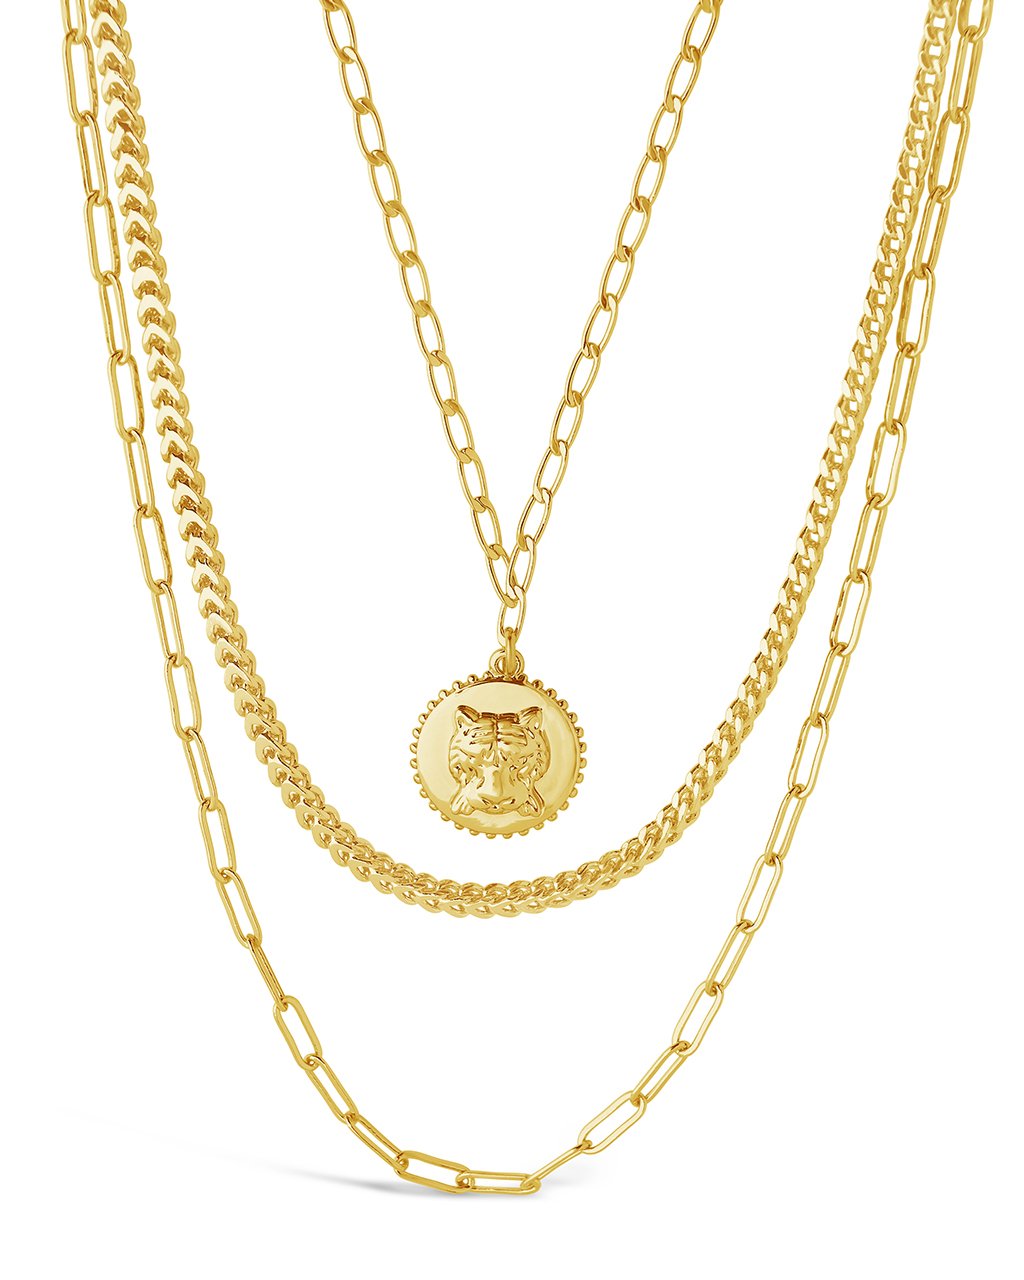 Layered Chains with Tiger Charm Necklace Sterling Forever Gold 